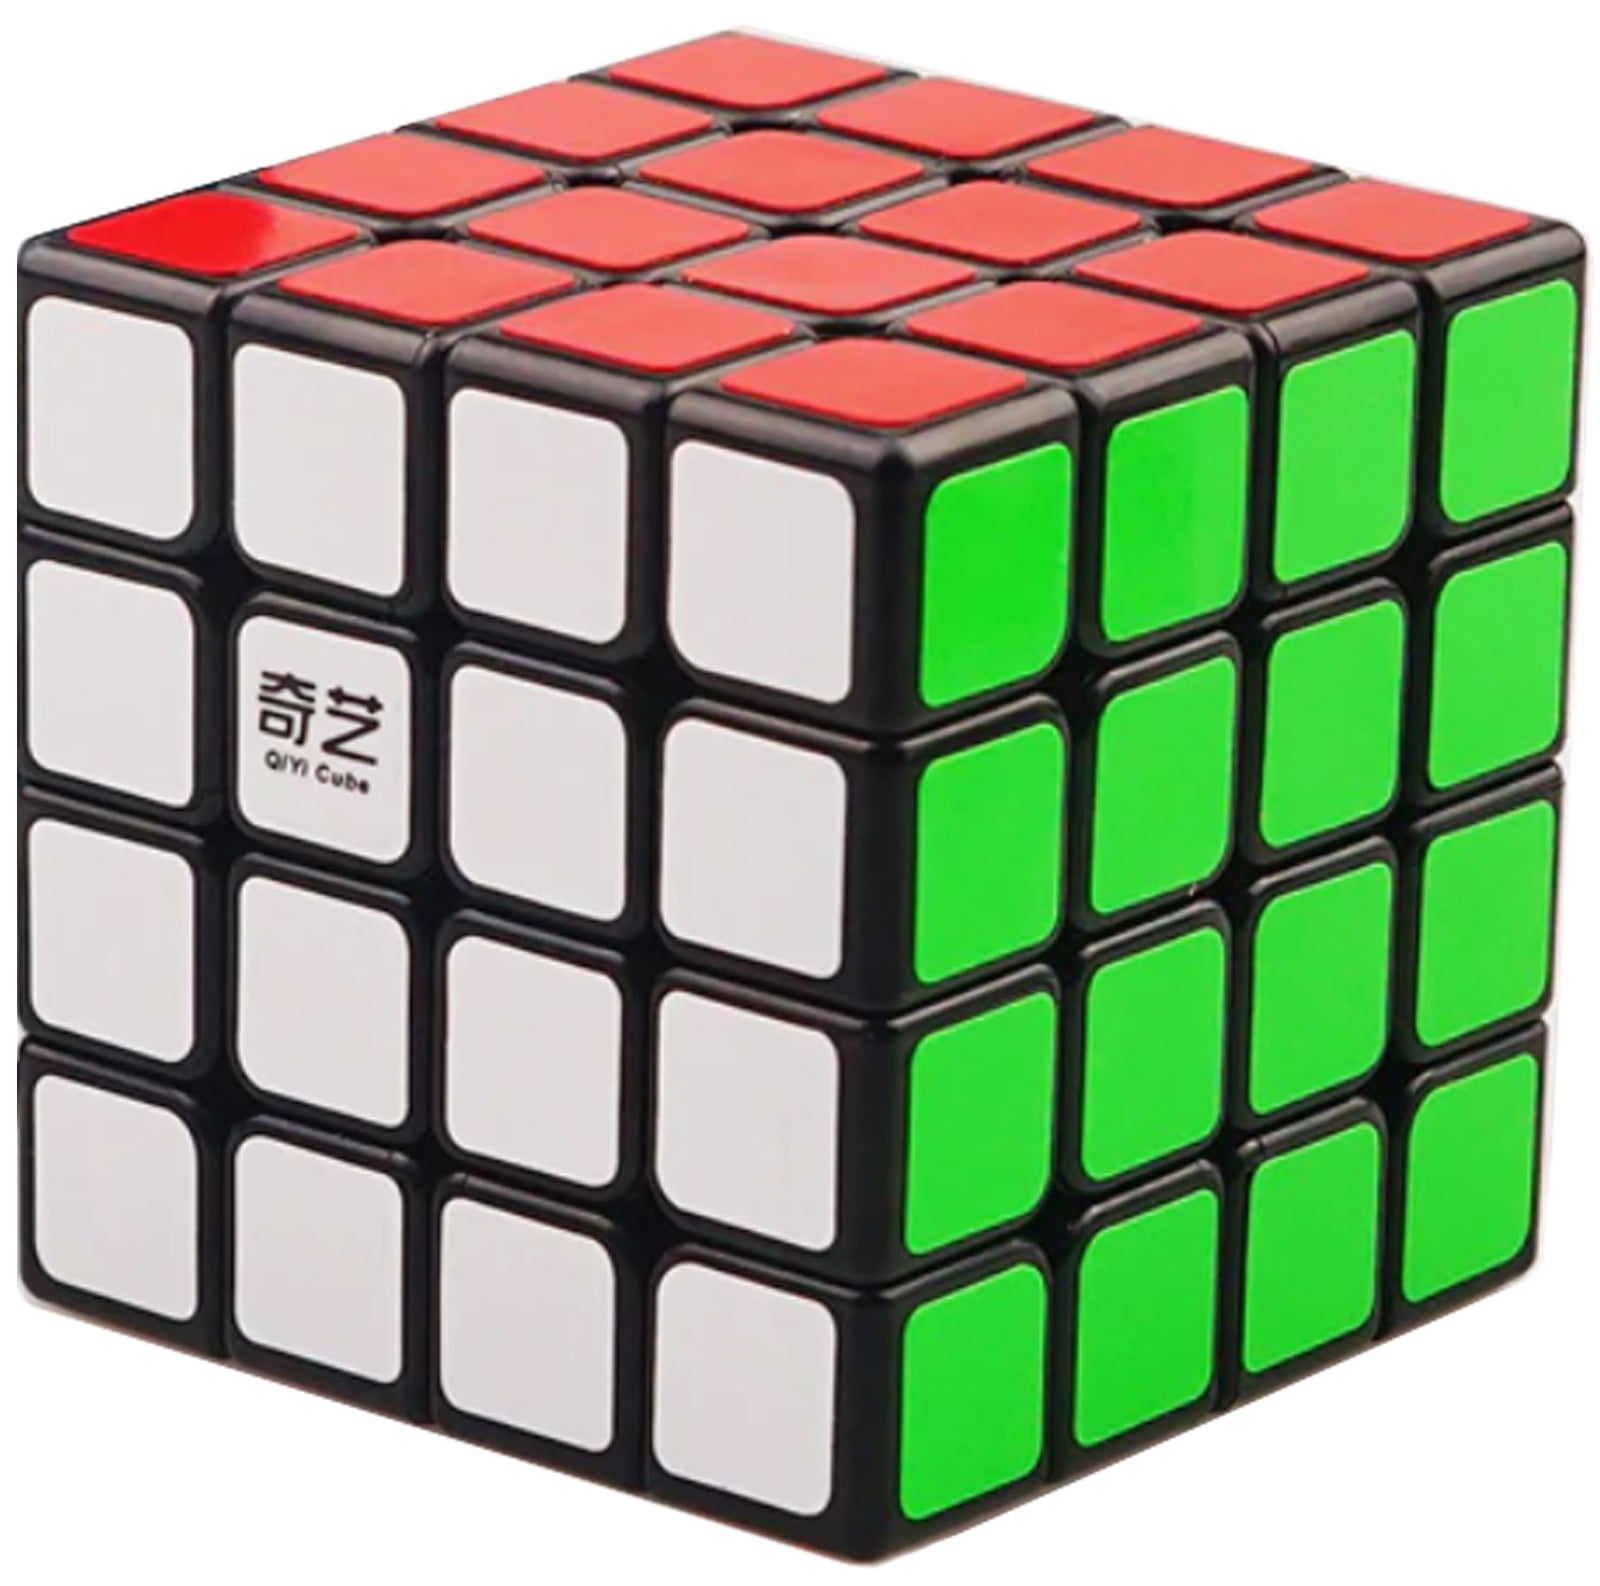 Details about   3x3 Rubix Cube Speed Puzzle Cube Brain Trainer Educational Learning 3D Puzzle 